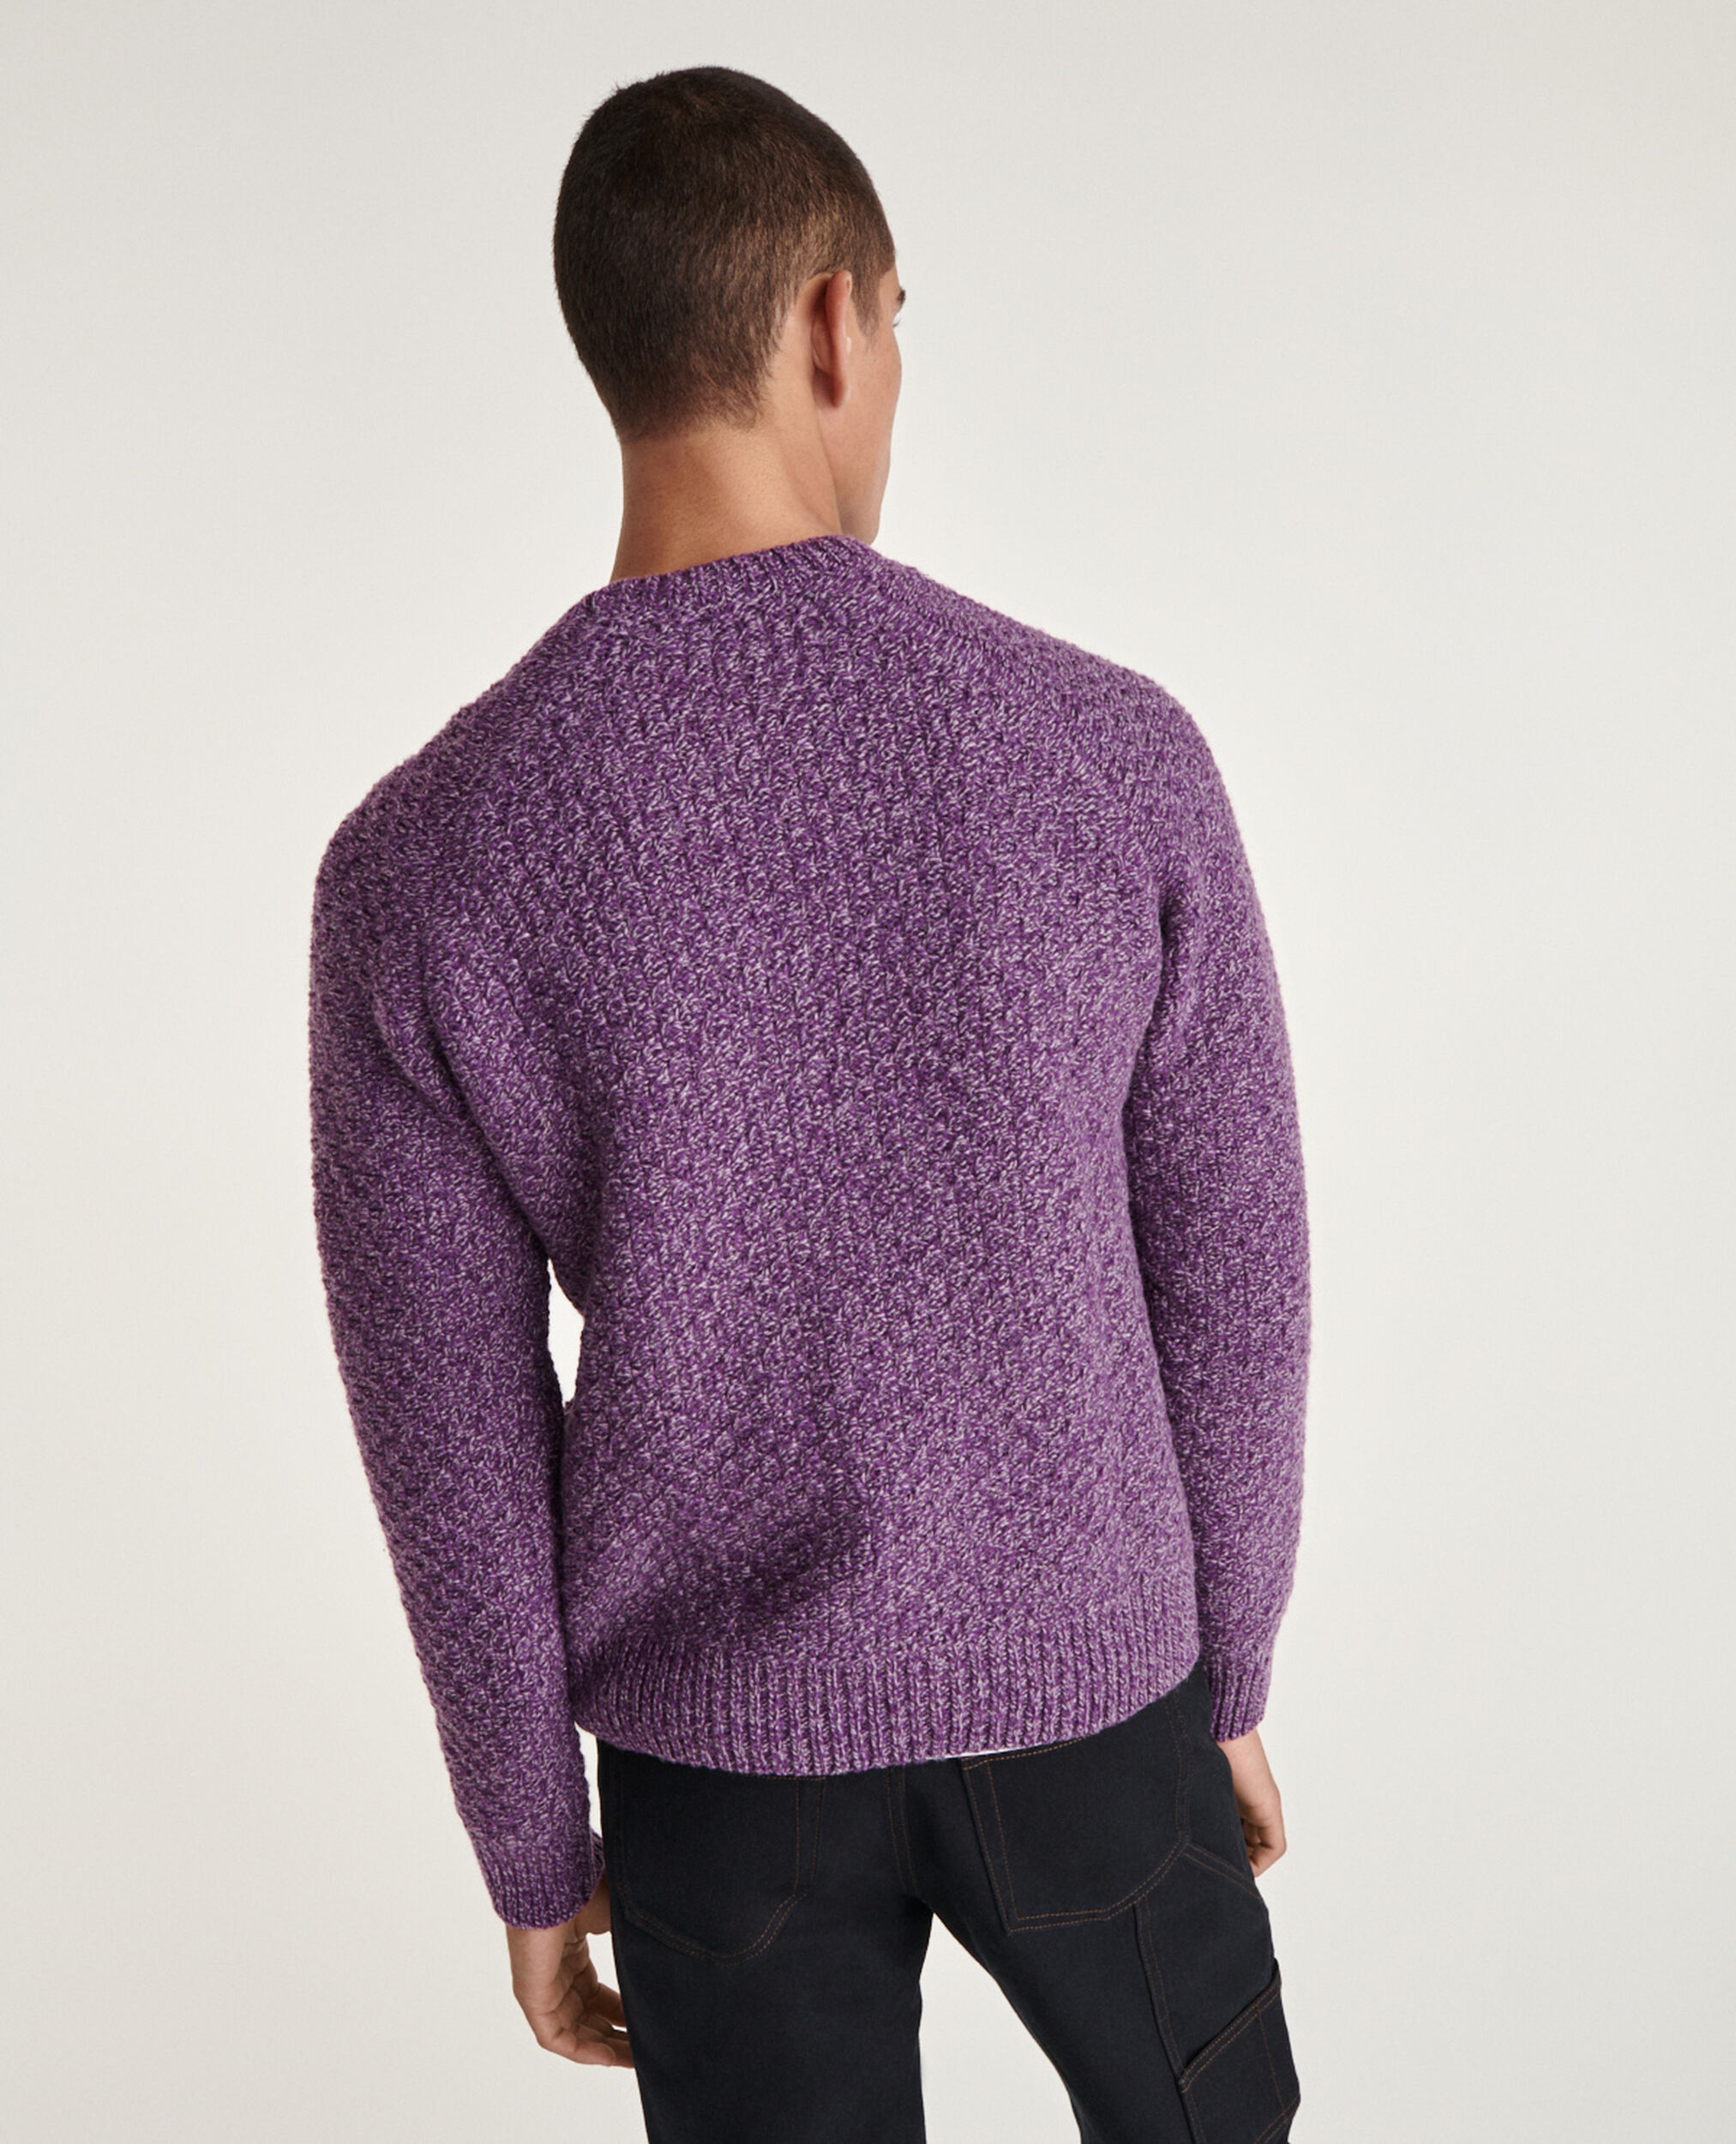 Wollpullover violett Wabenmuster, PURPLE, hi-res image number null